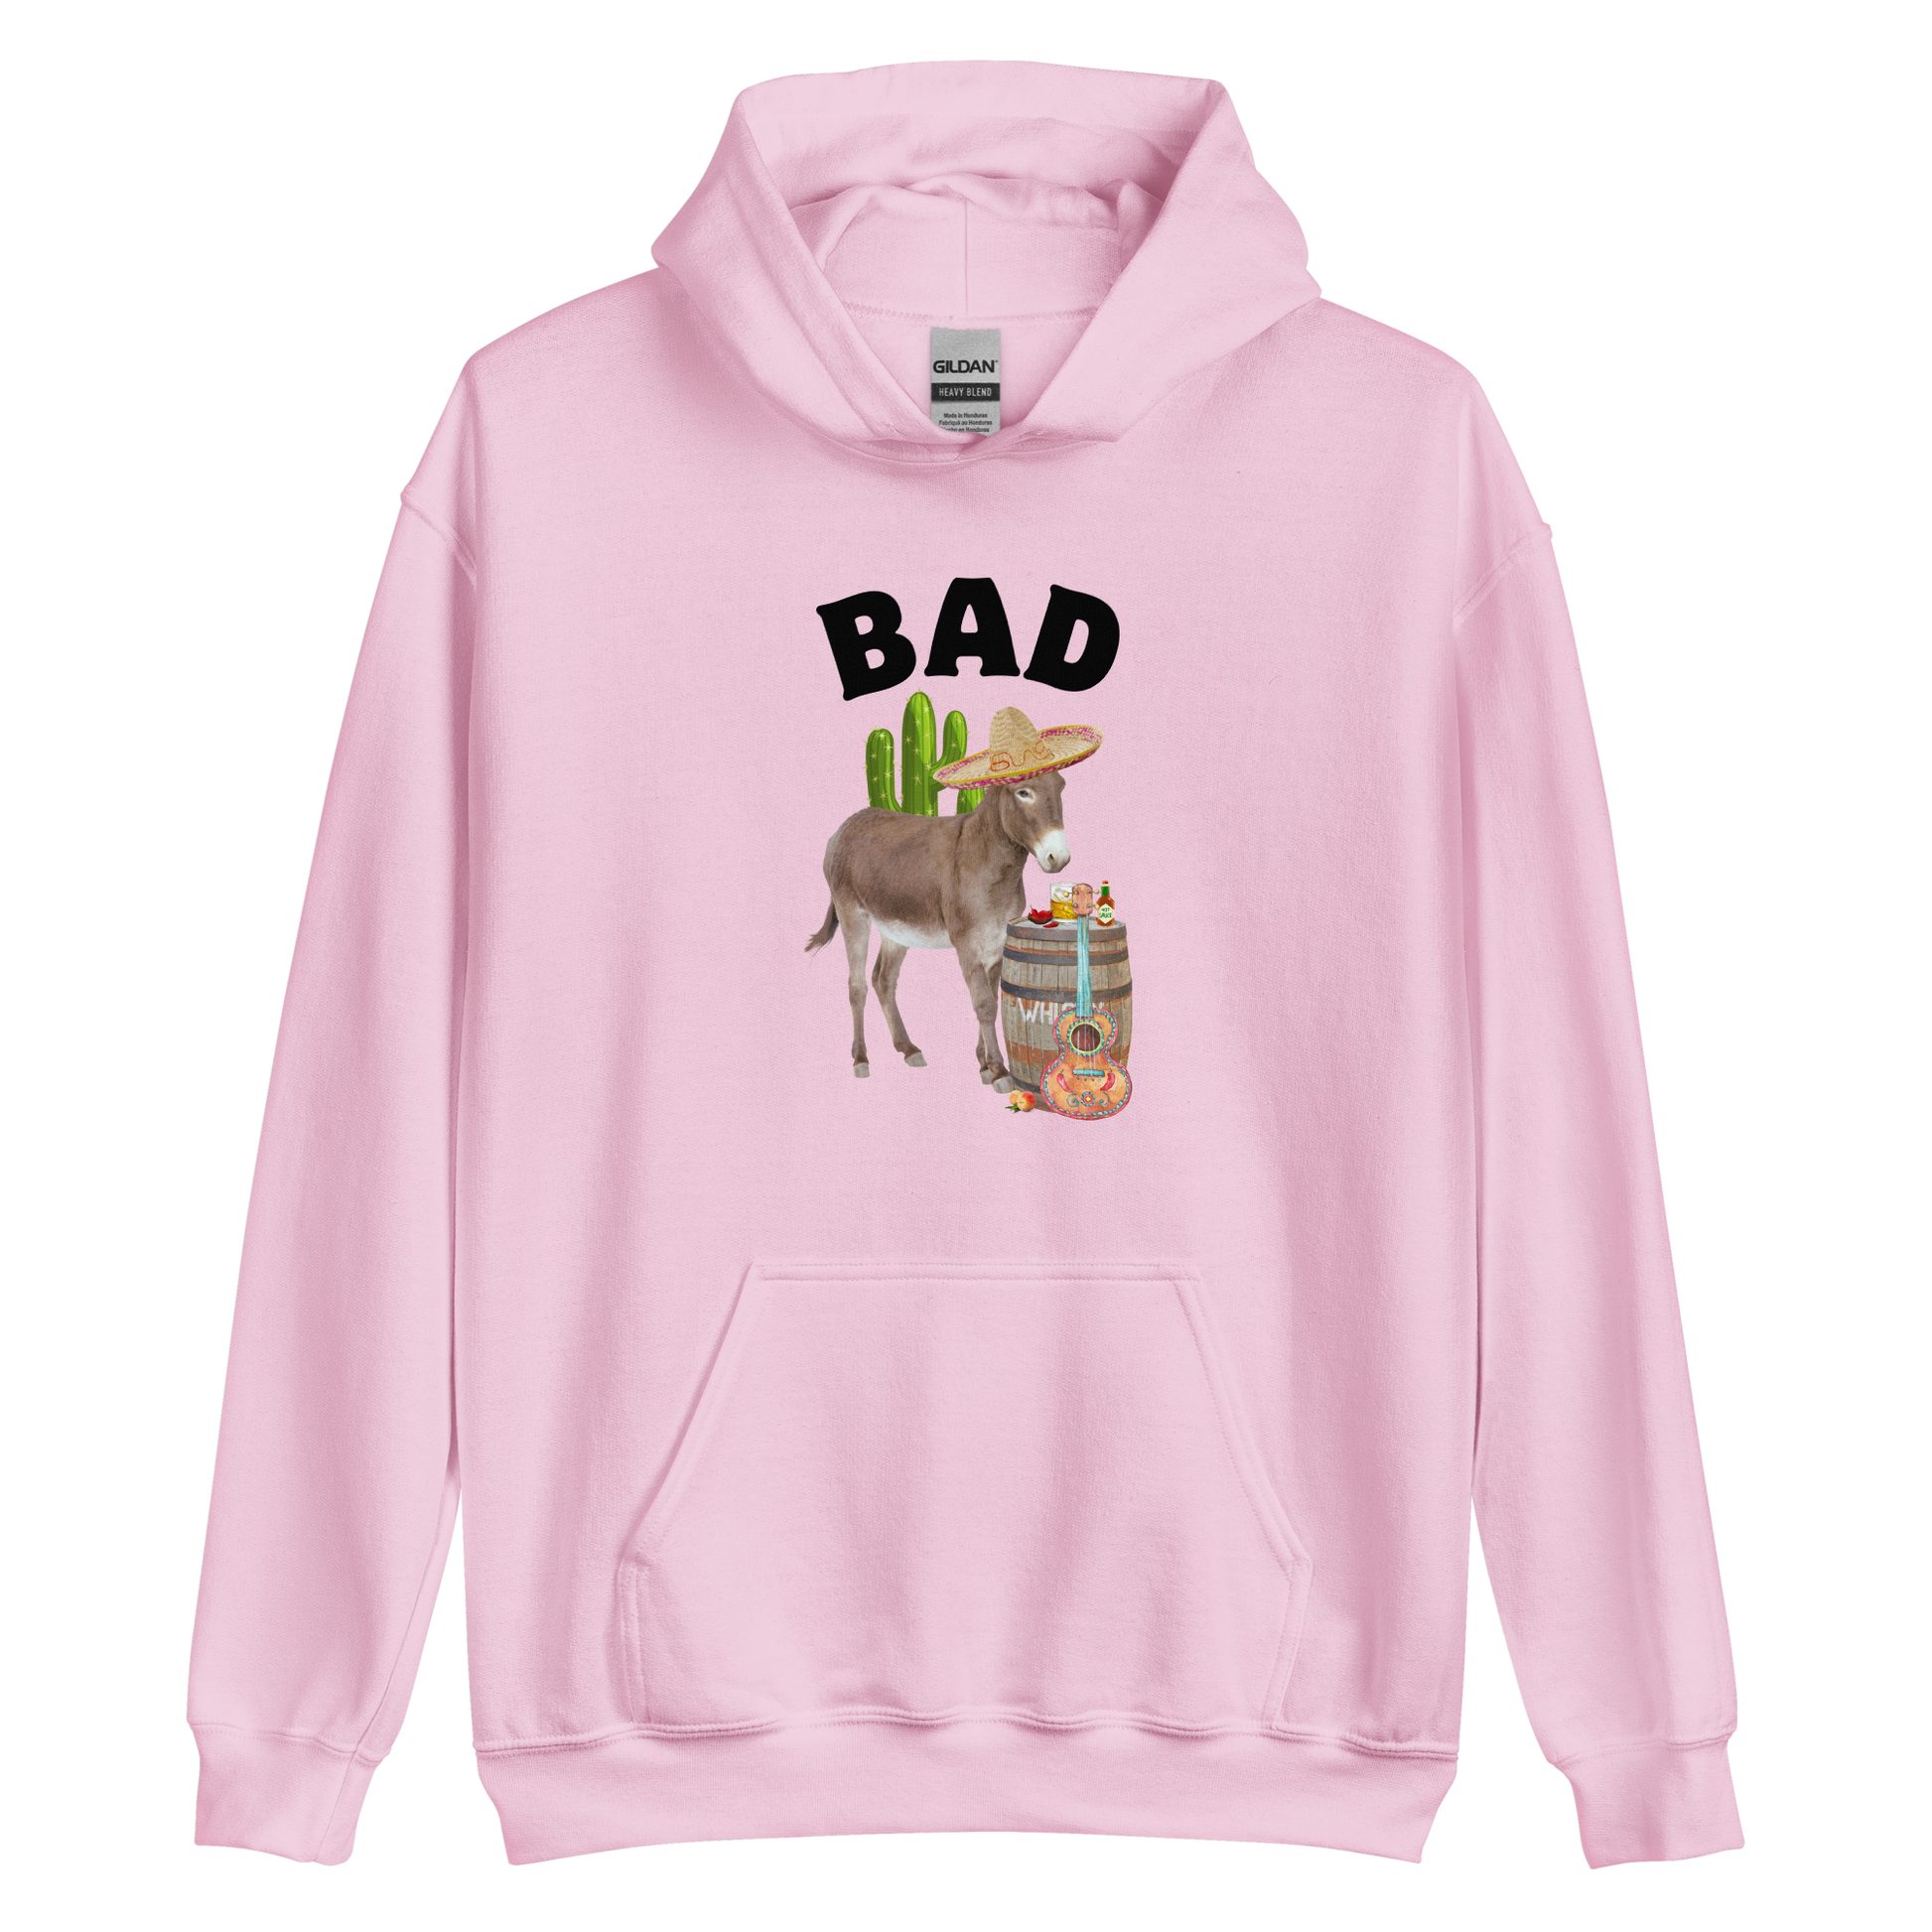 Light Pink Donkey Hoodie Featuring a Funny Bad Ass Donkey graphic on the chest - Funny Graphic Bad Ass Donkey Hoodies - Boozy Fox